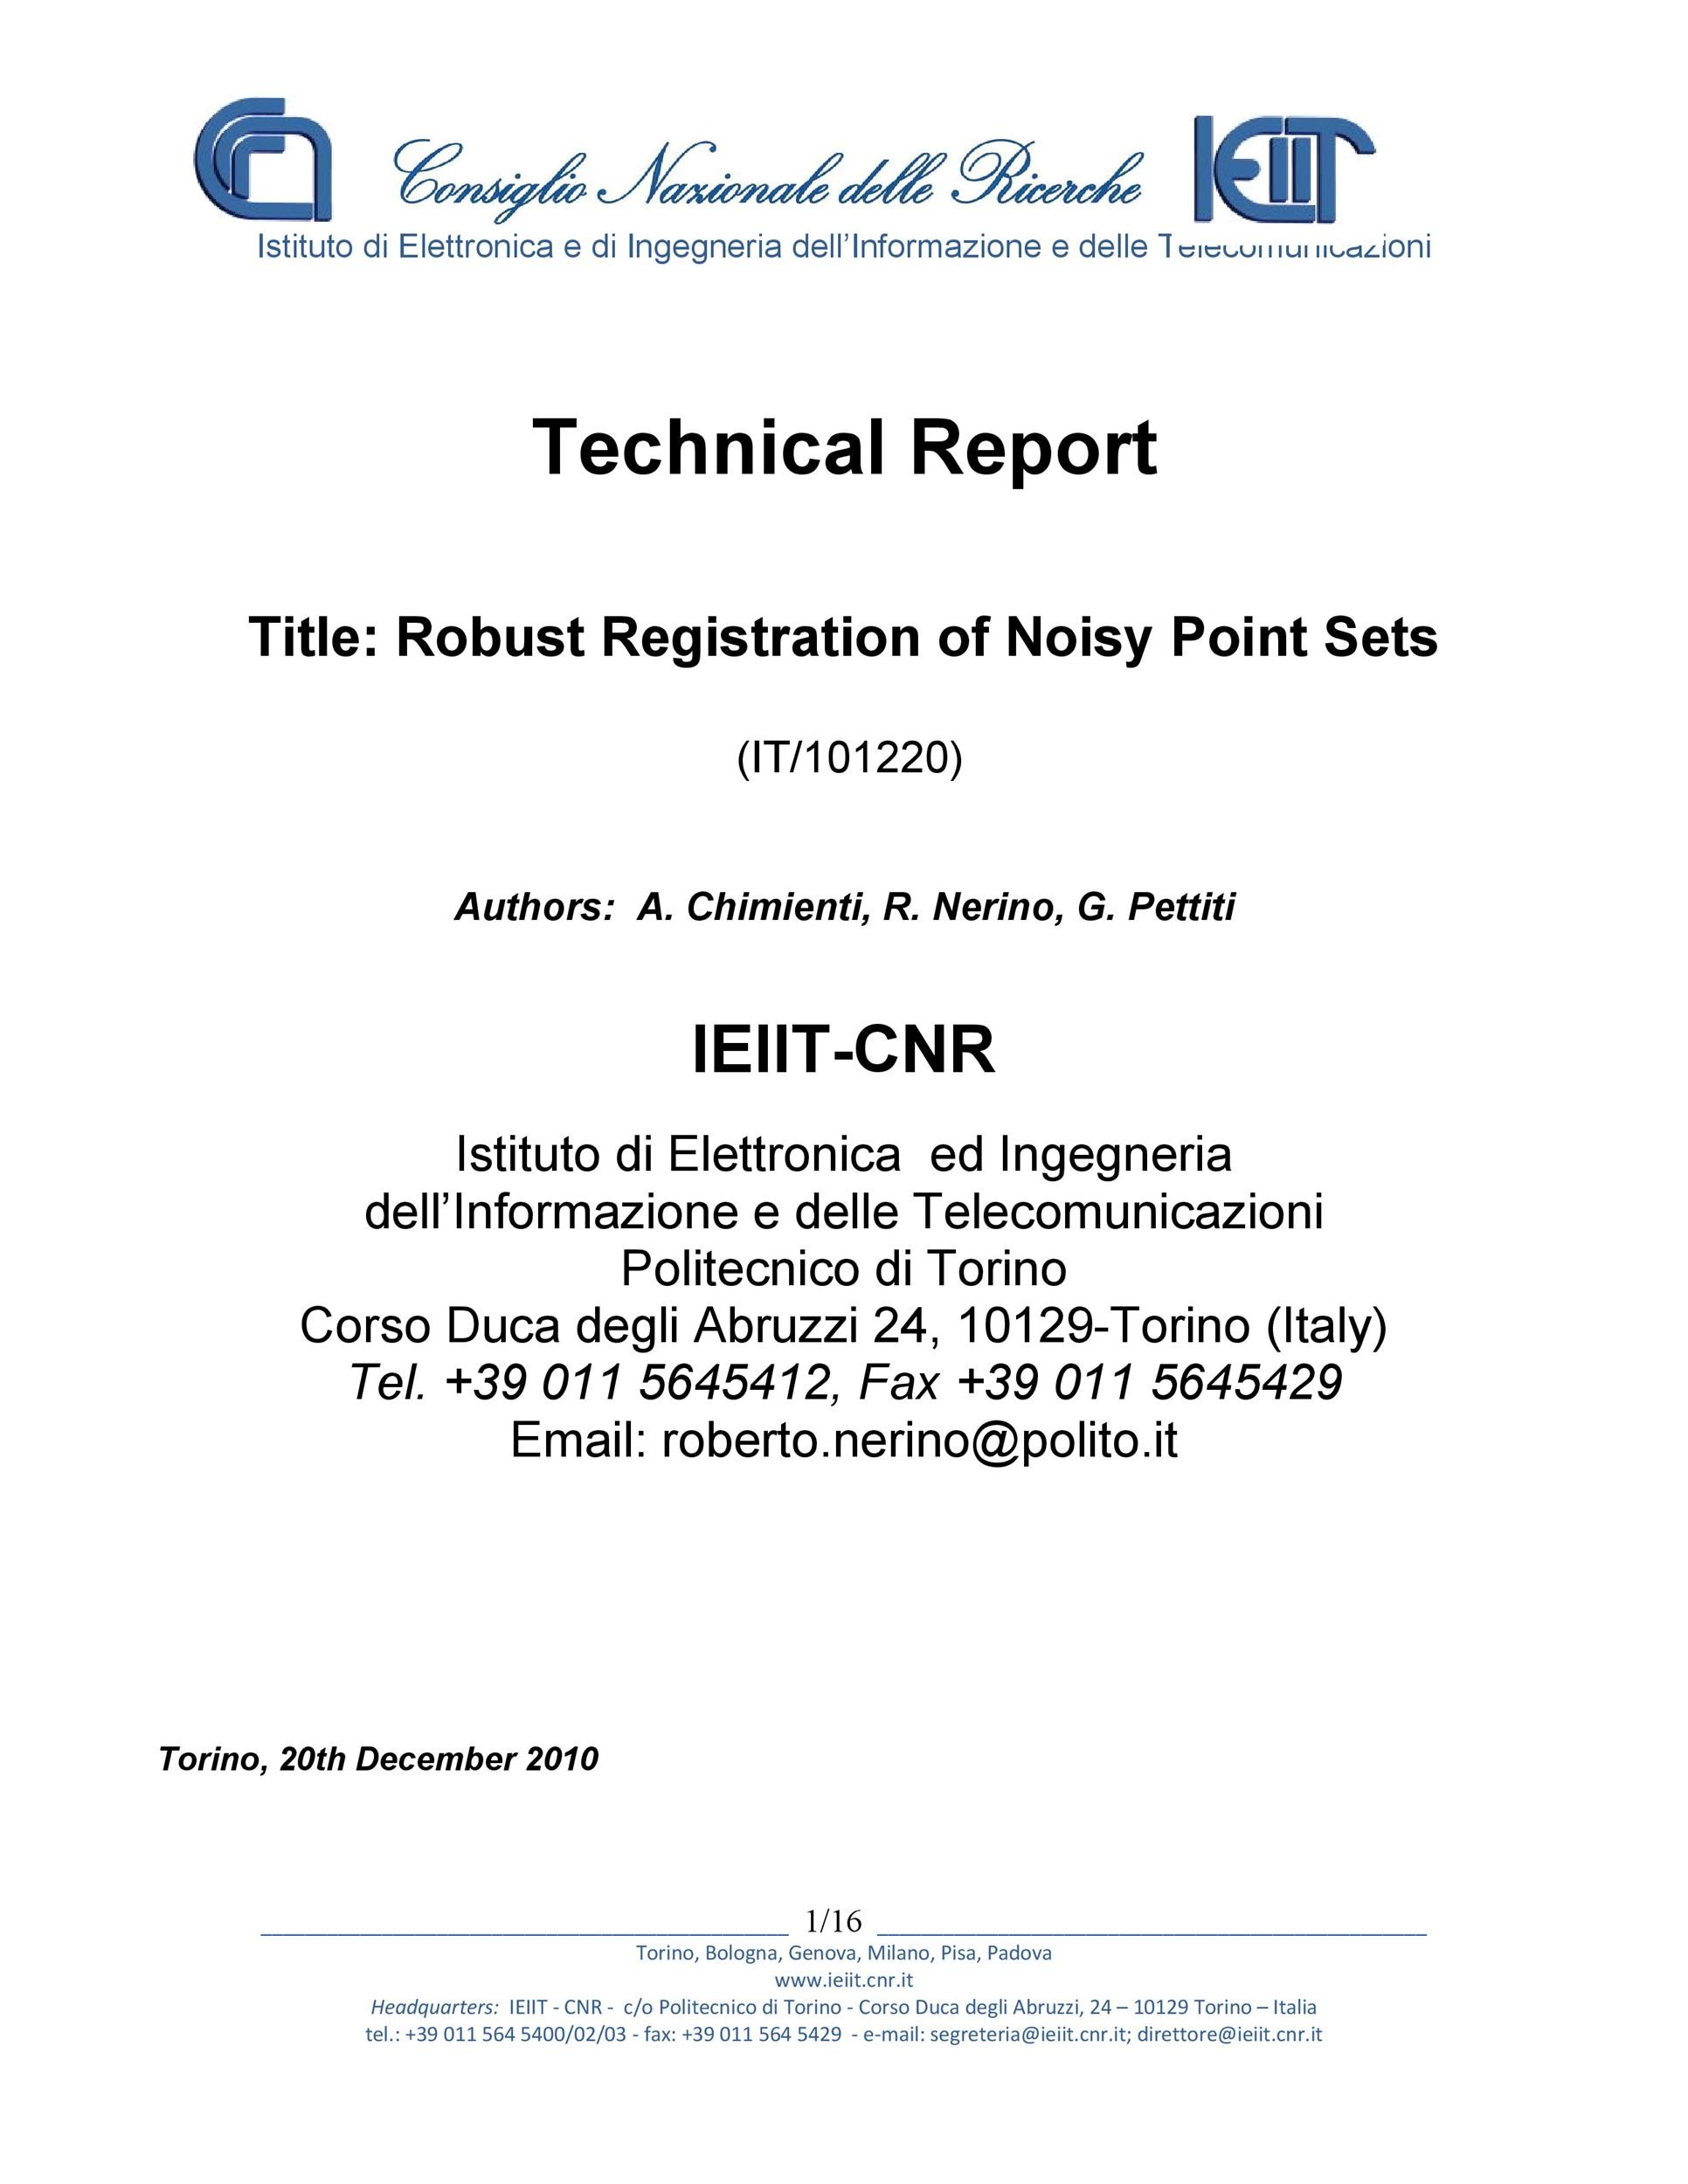 how to write the technical report